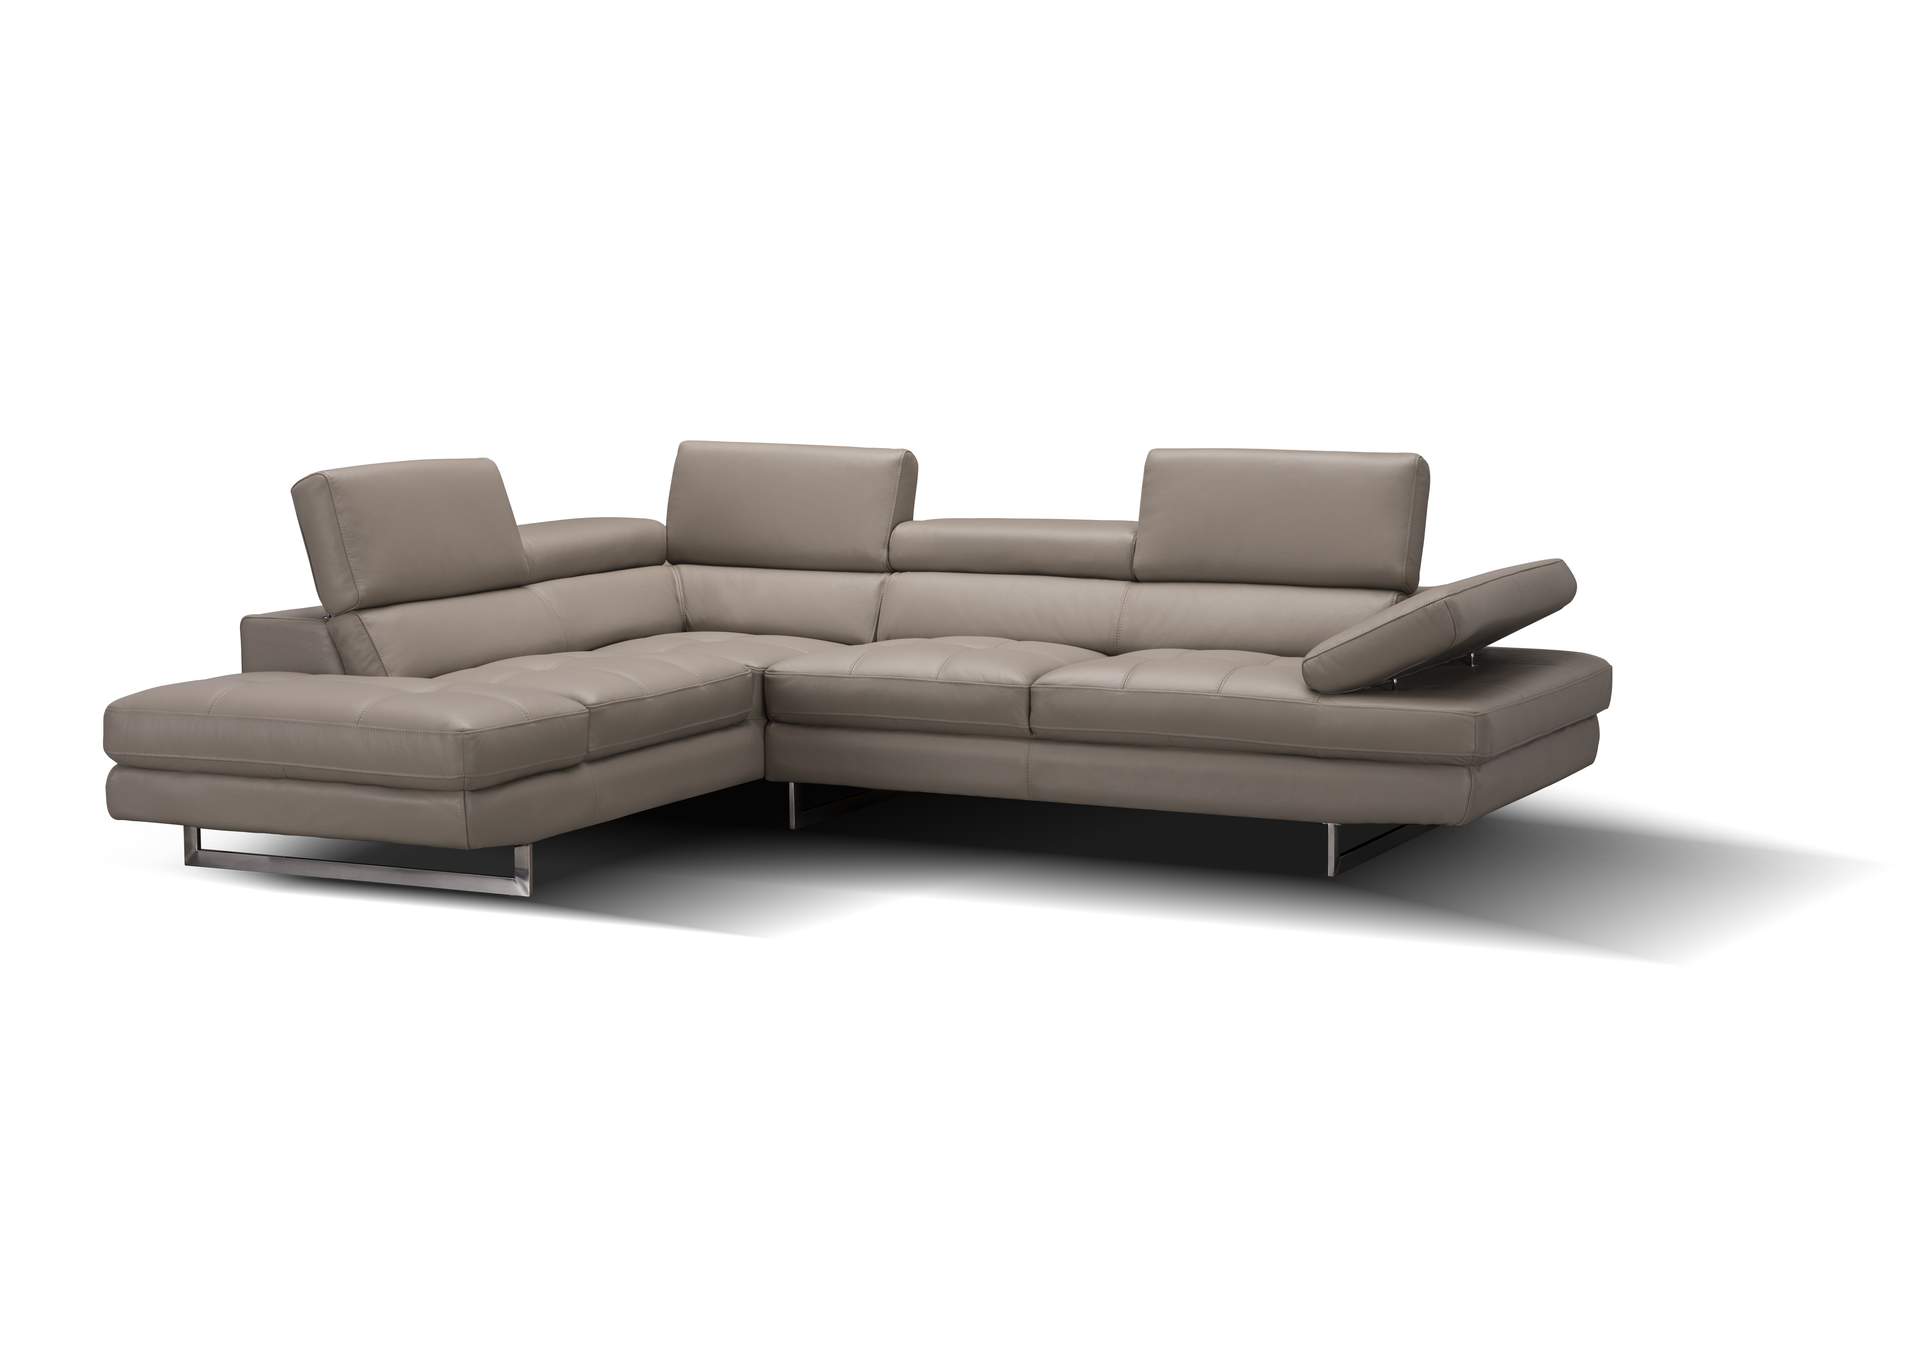 A761 Italian Leather Sectional Peanut In Left hand Facing,J&M Furniture